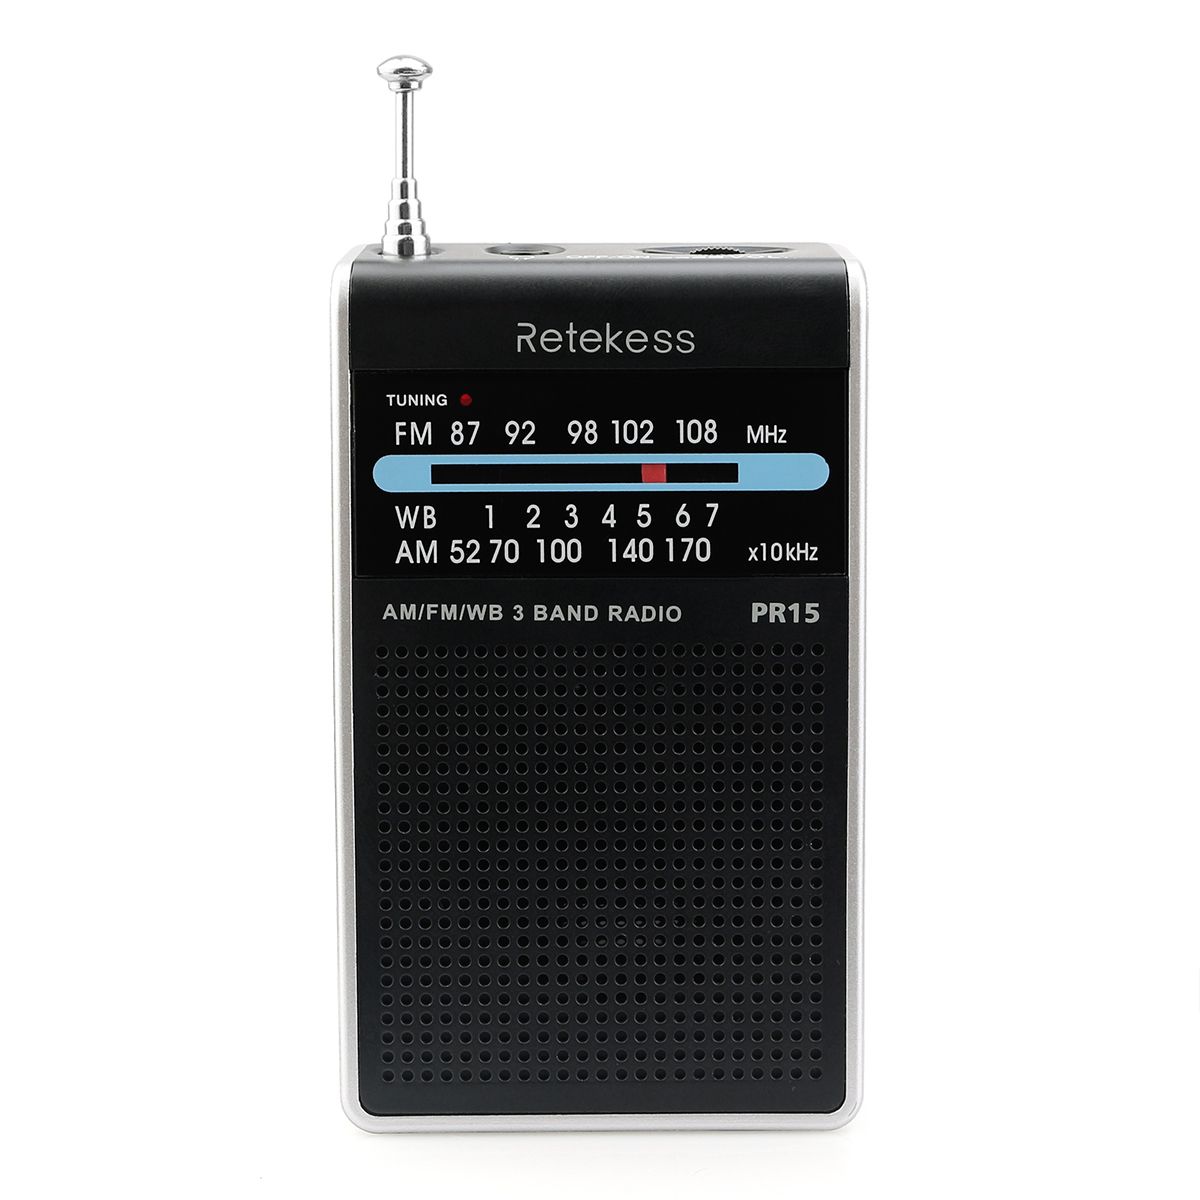 Retekess-F9214-PR15-Digital-Display-Radio-with-FM-AM-for-Family-Camping-Outdoor-1448812